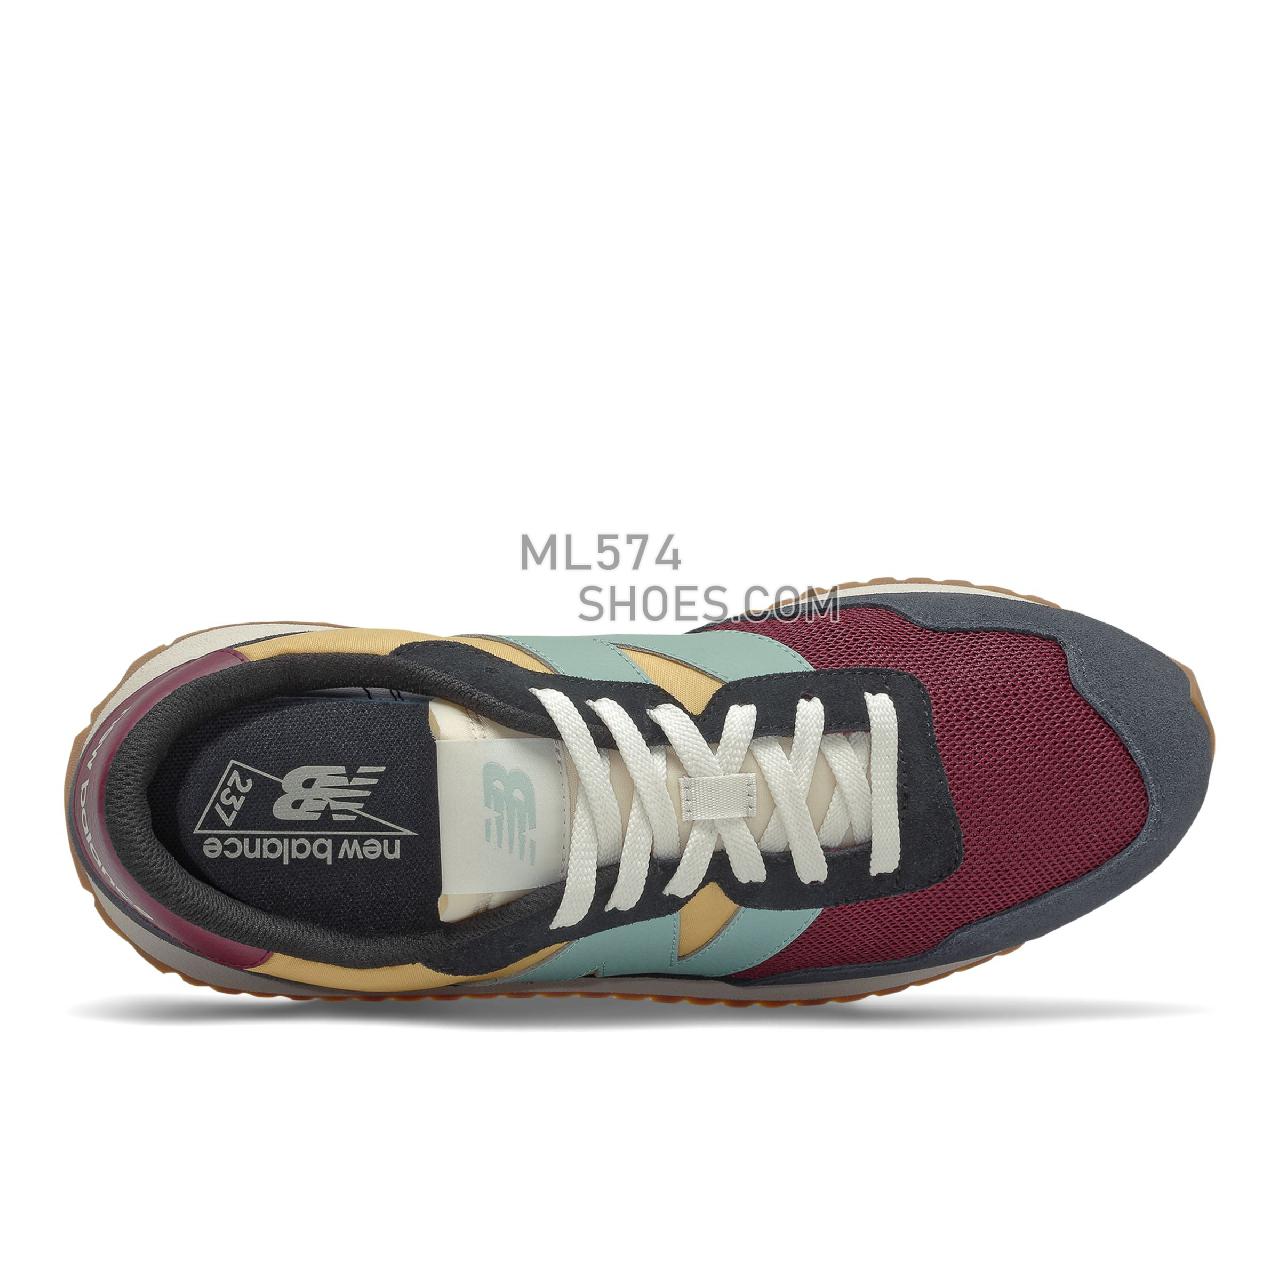 New Balance 237 - Men's Sport Style Sneakers - Outerspace with Garnet - MS237HG1